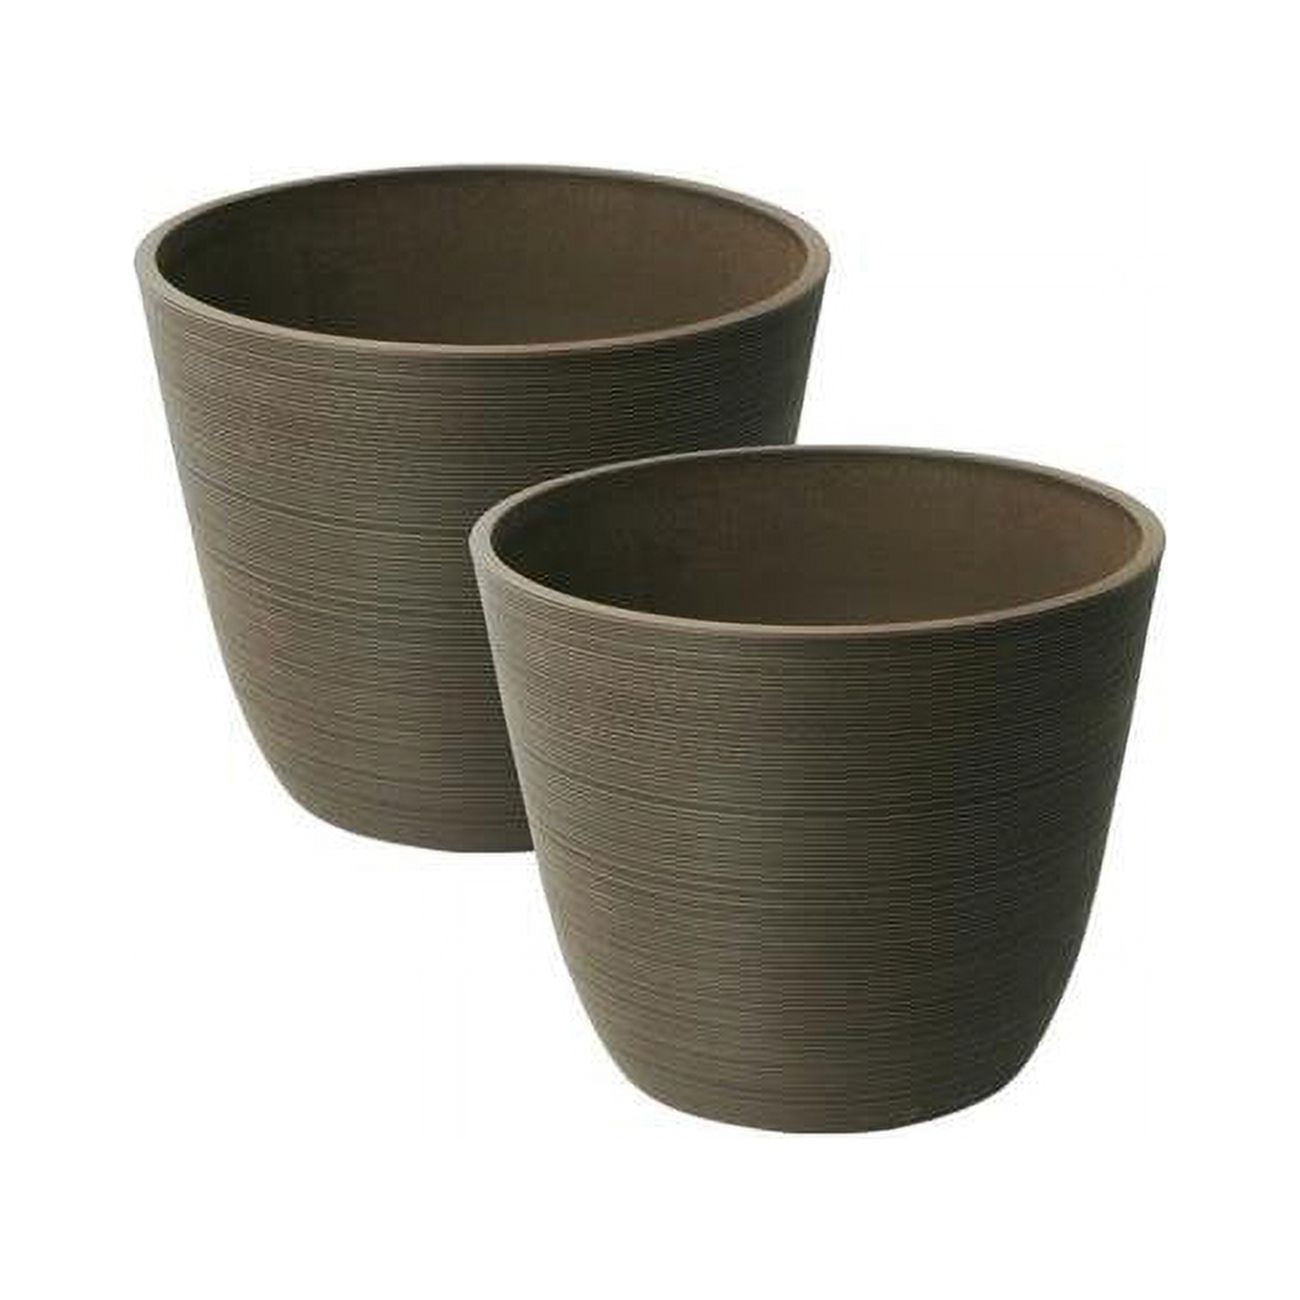 23136 Valencia 14 In. Dia. By 11 In. 2 Round Curve Planters, Ribbed Chocolate - Pack Of 2